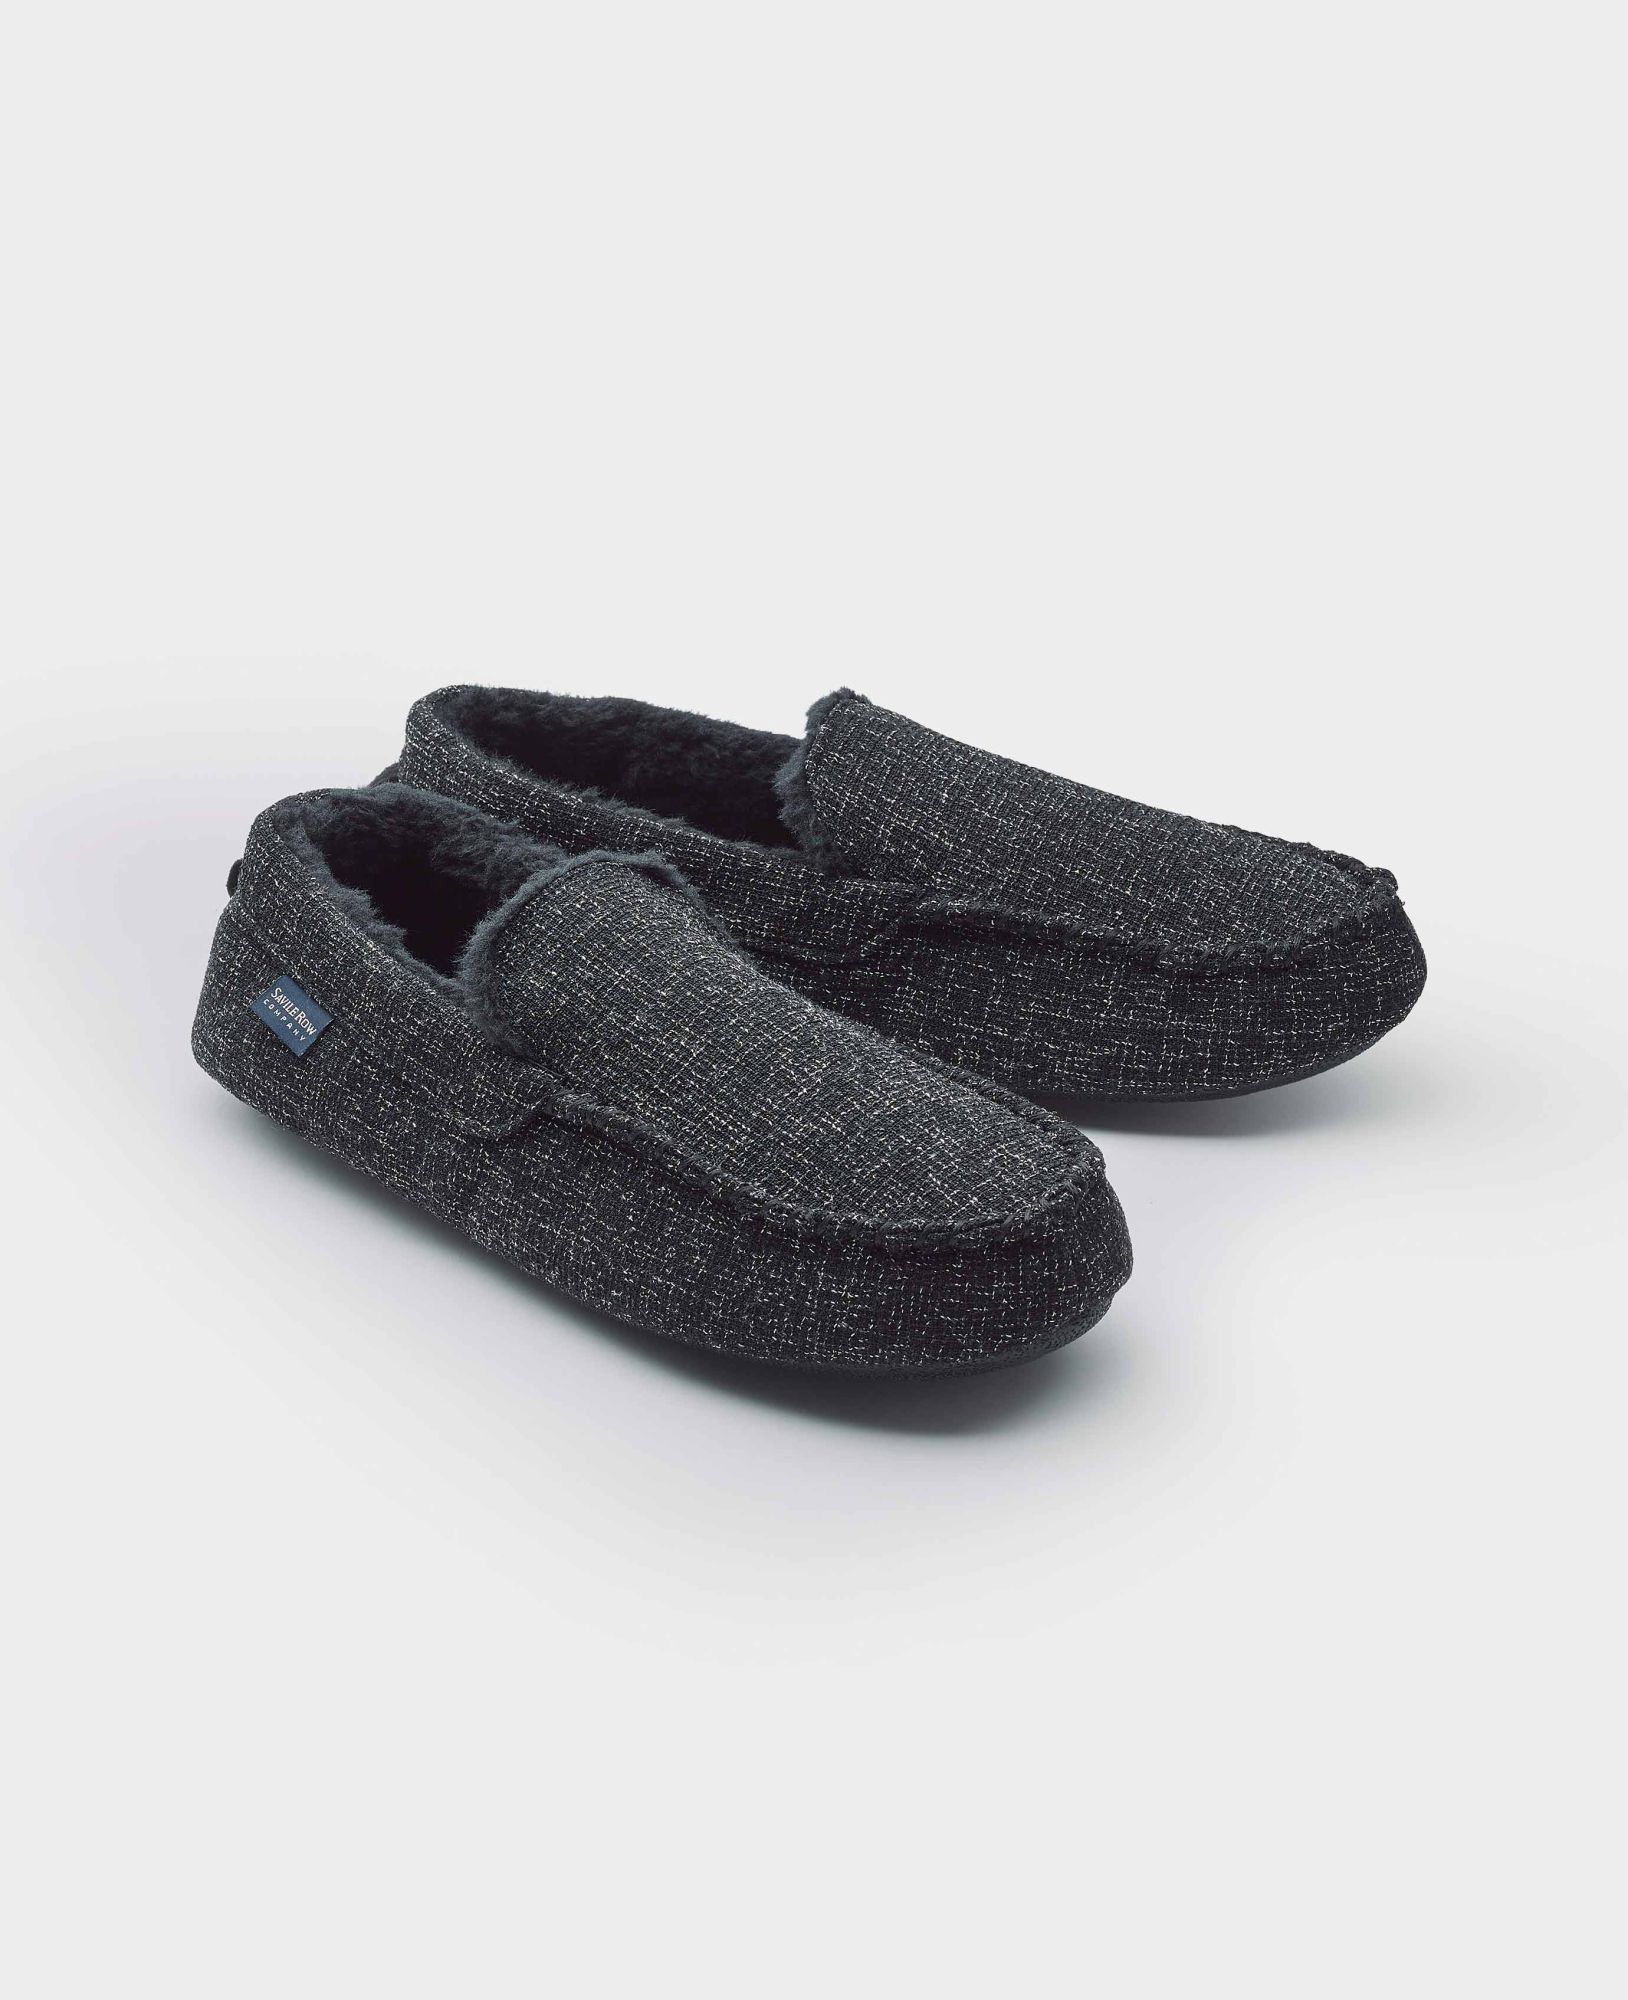 Black Textured Moccasin Slippers 9